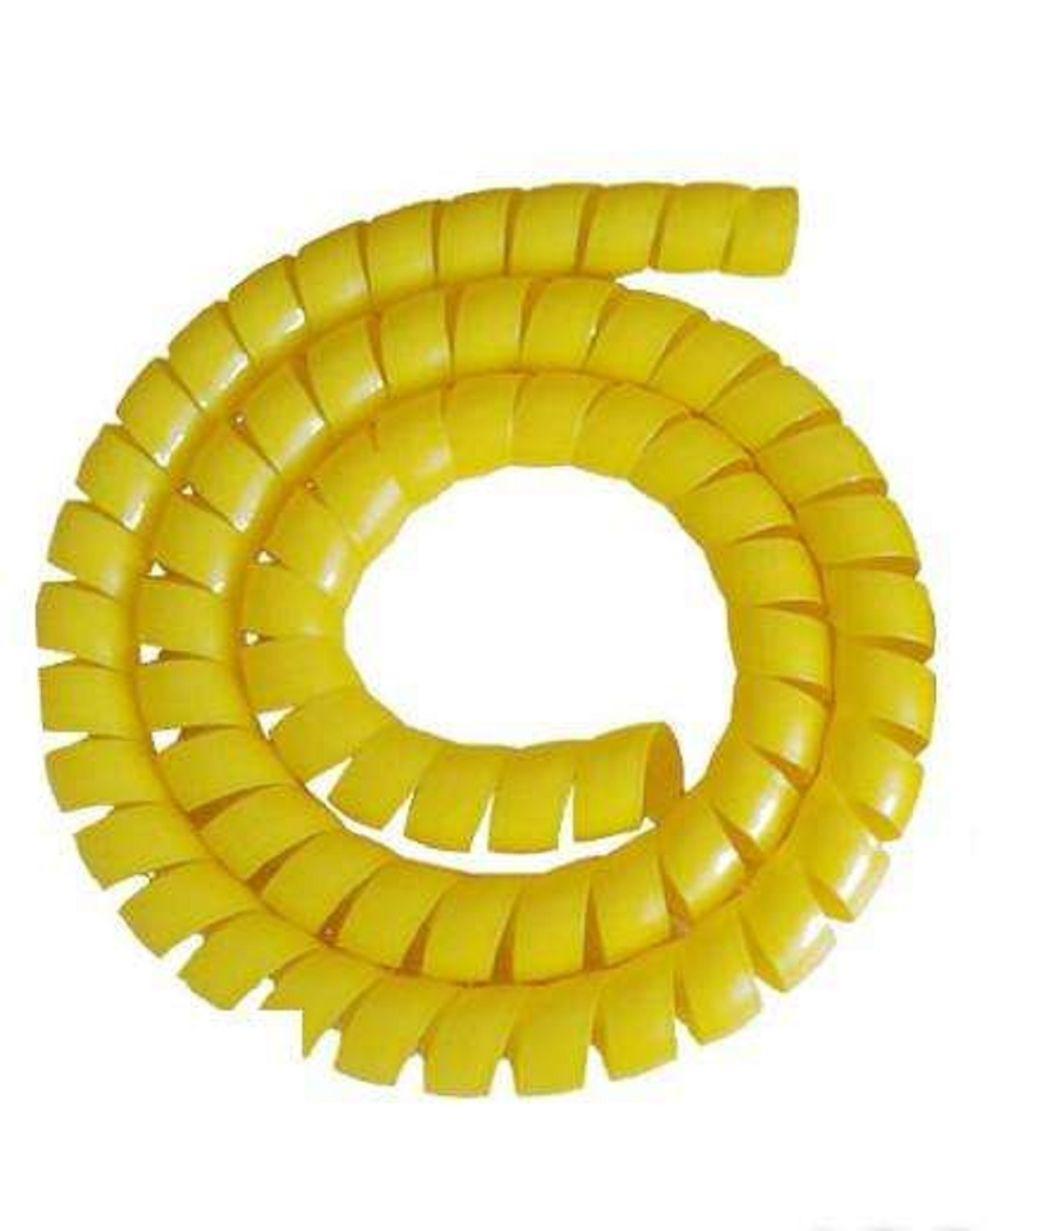 PP Material Rubber Hose Cover Protector Sleeve Spiral